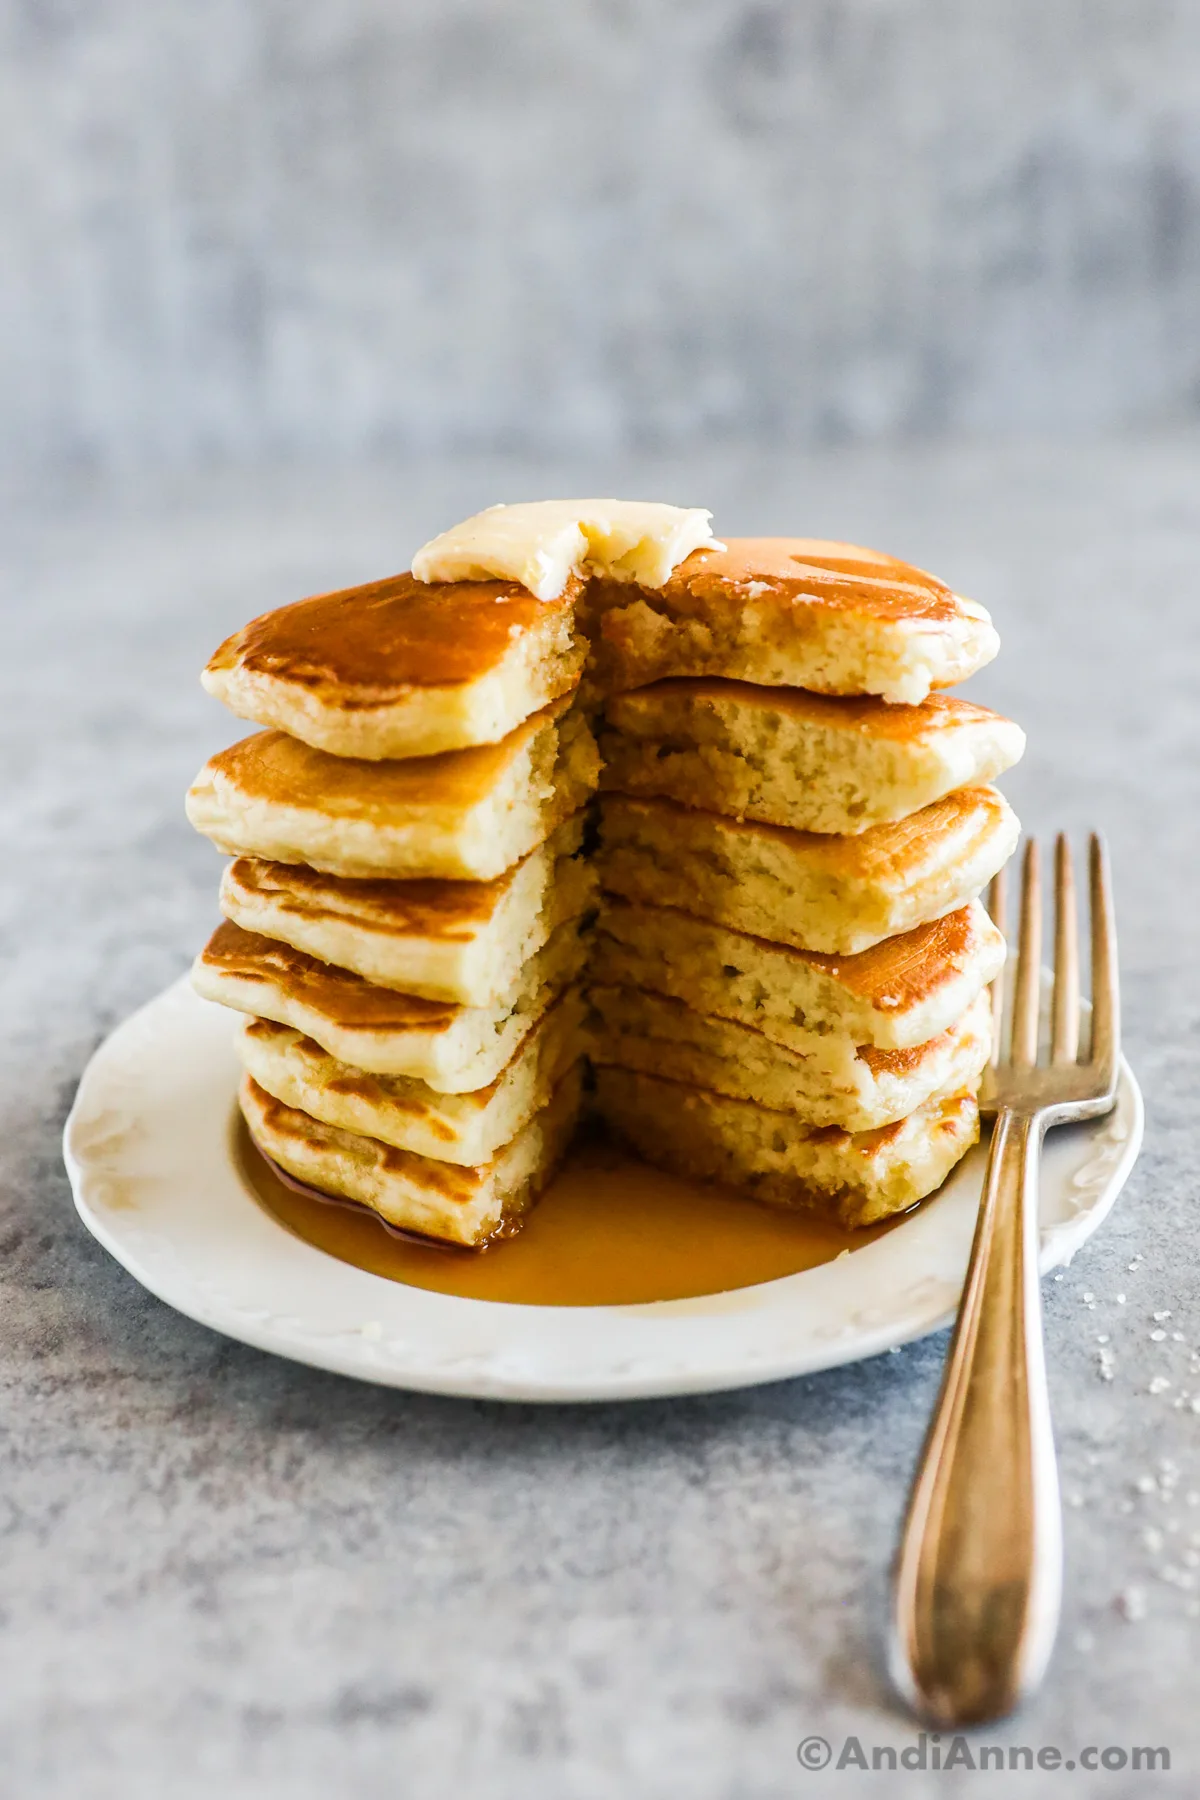 A stack of pancakes with butter and maple syrup. A triangle shaped slice is cut out and a fork beside on plate.